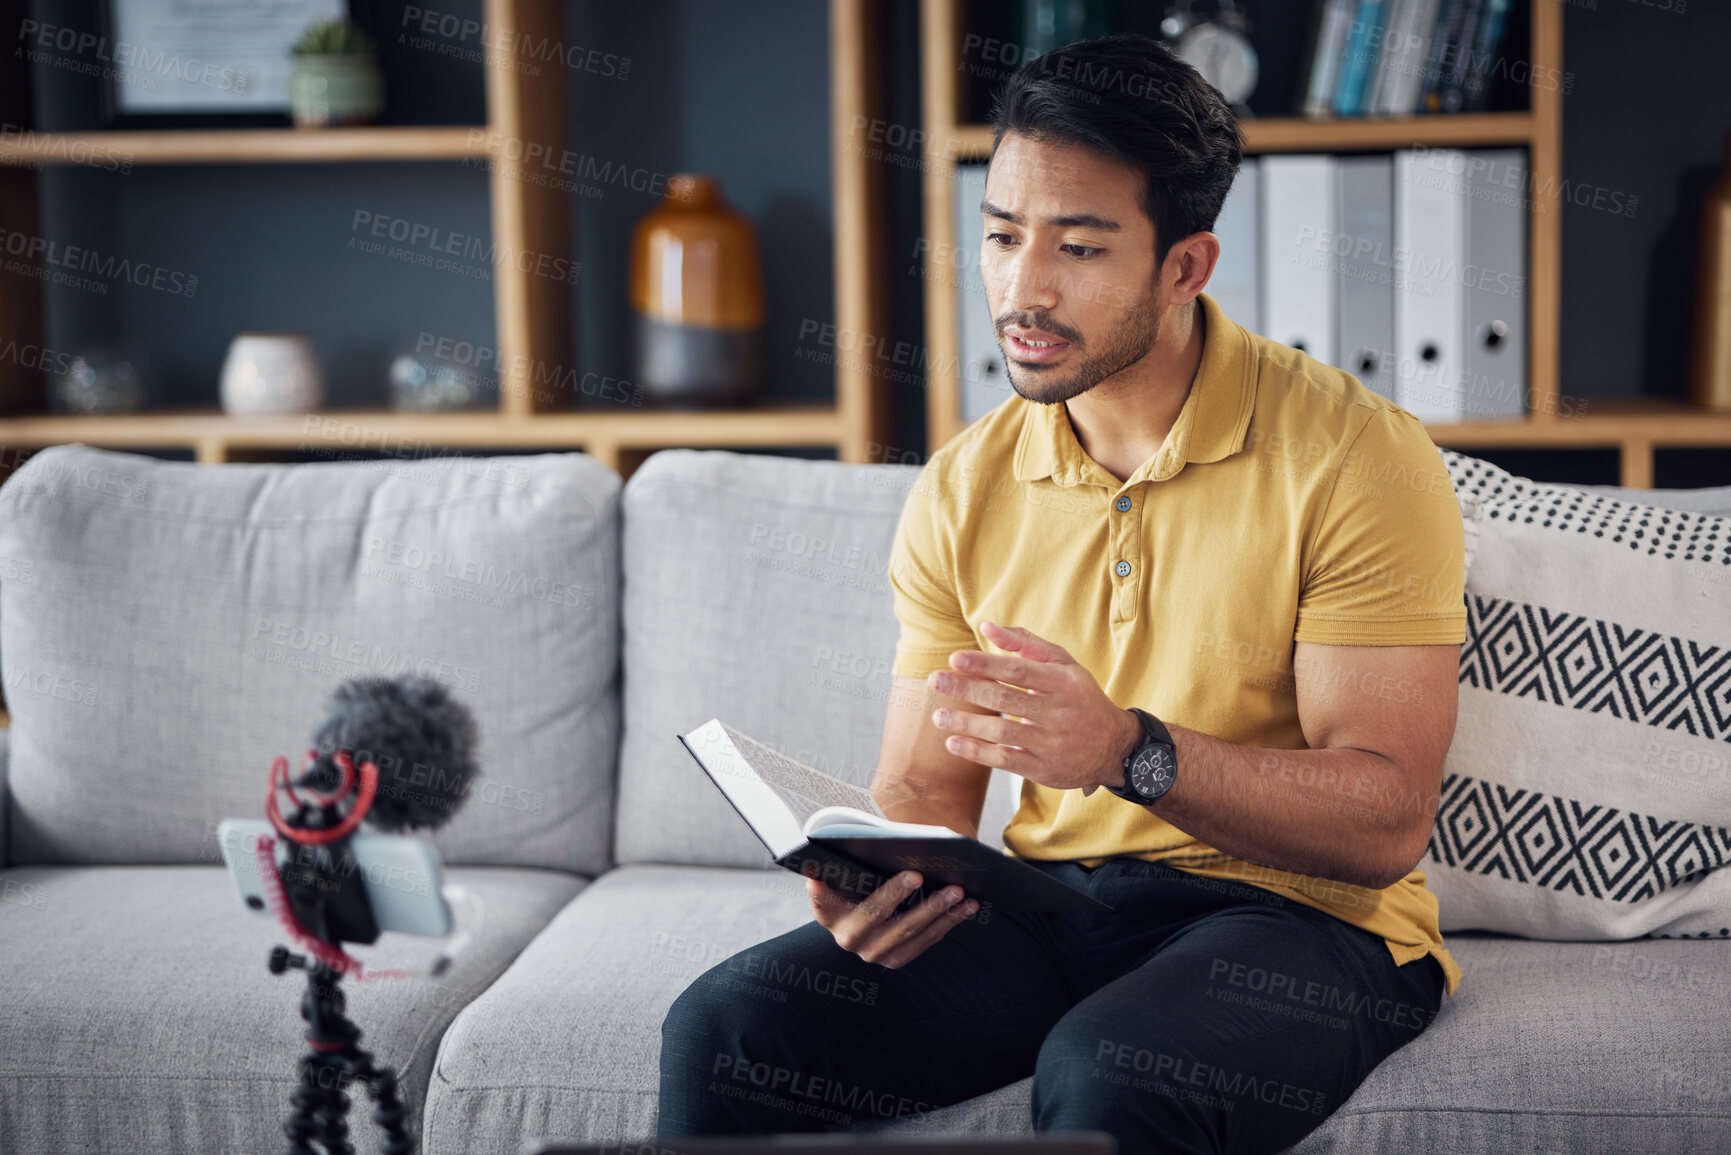 Buy stock photo Podcast, bible study and phone with a man online to preach or reading while live streaming. Asian male on home sofa with Christian scripture or book as content creator teaching on education religion